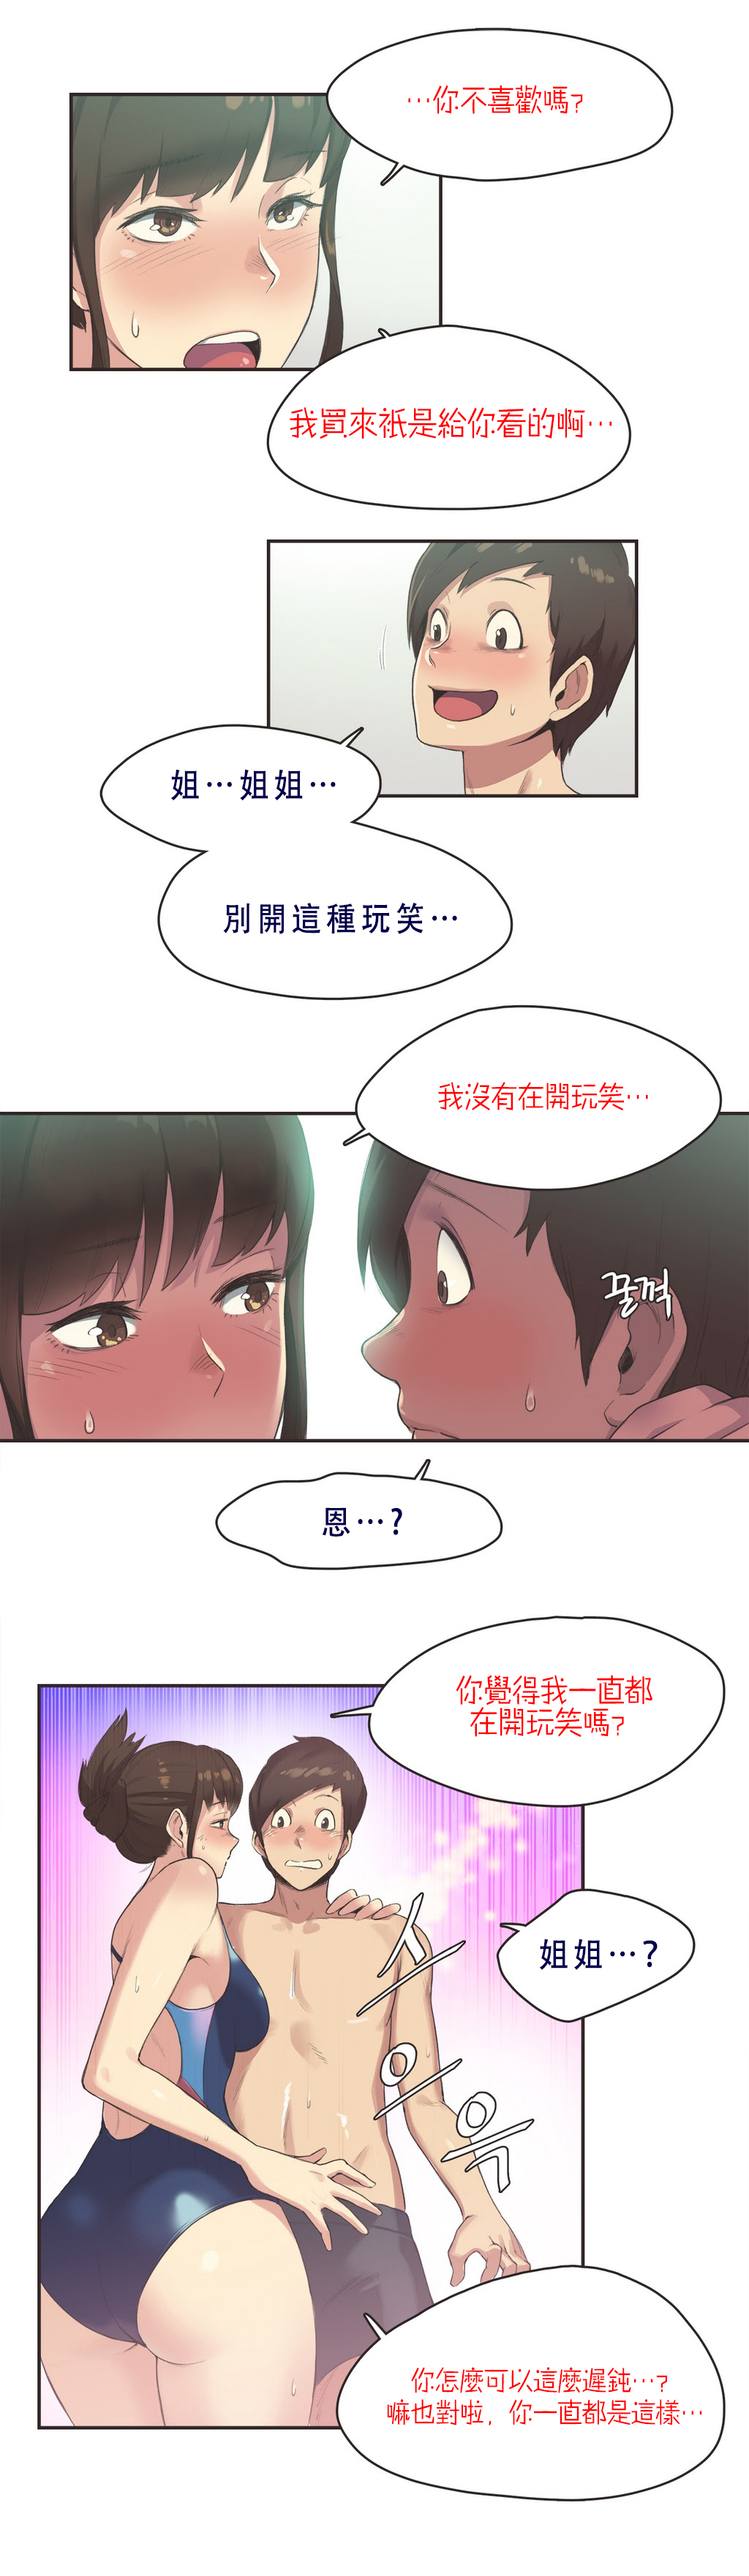 [Gamang] Sports Girl Ch.7 [Chinese] [高麗個人漢化] 